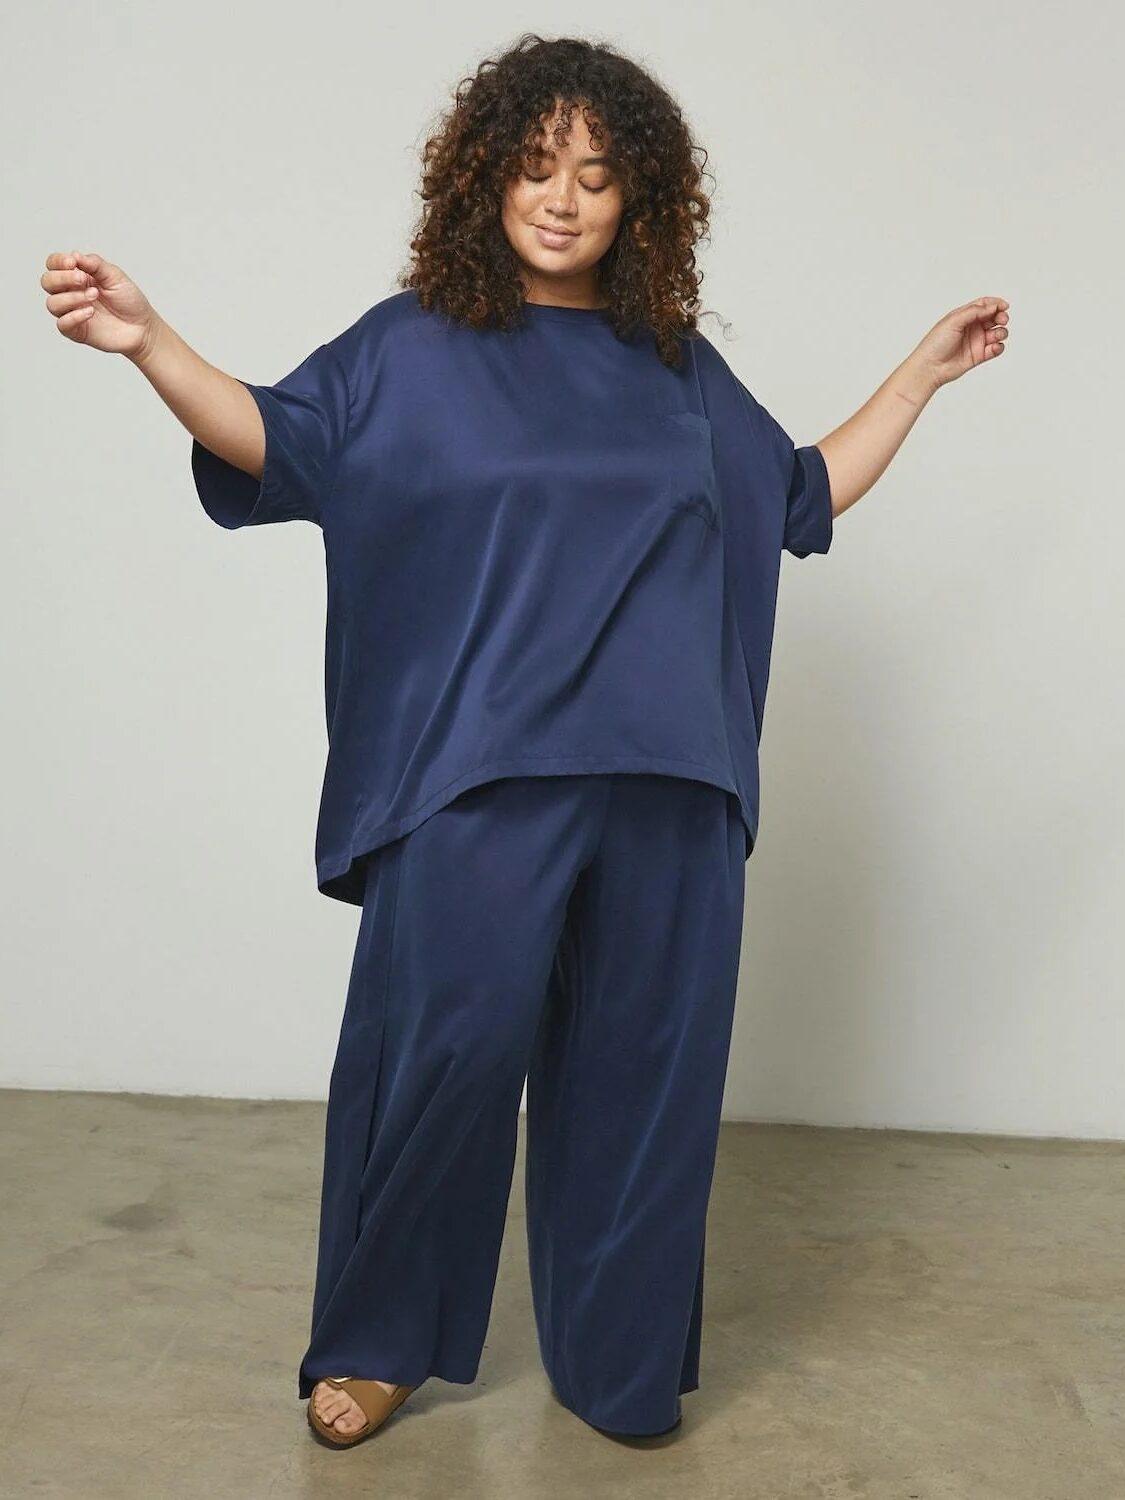 A model wearing a navy silk tee and wide leg pants set holds our her arms and smiles as she looks at the floor